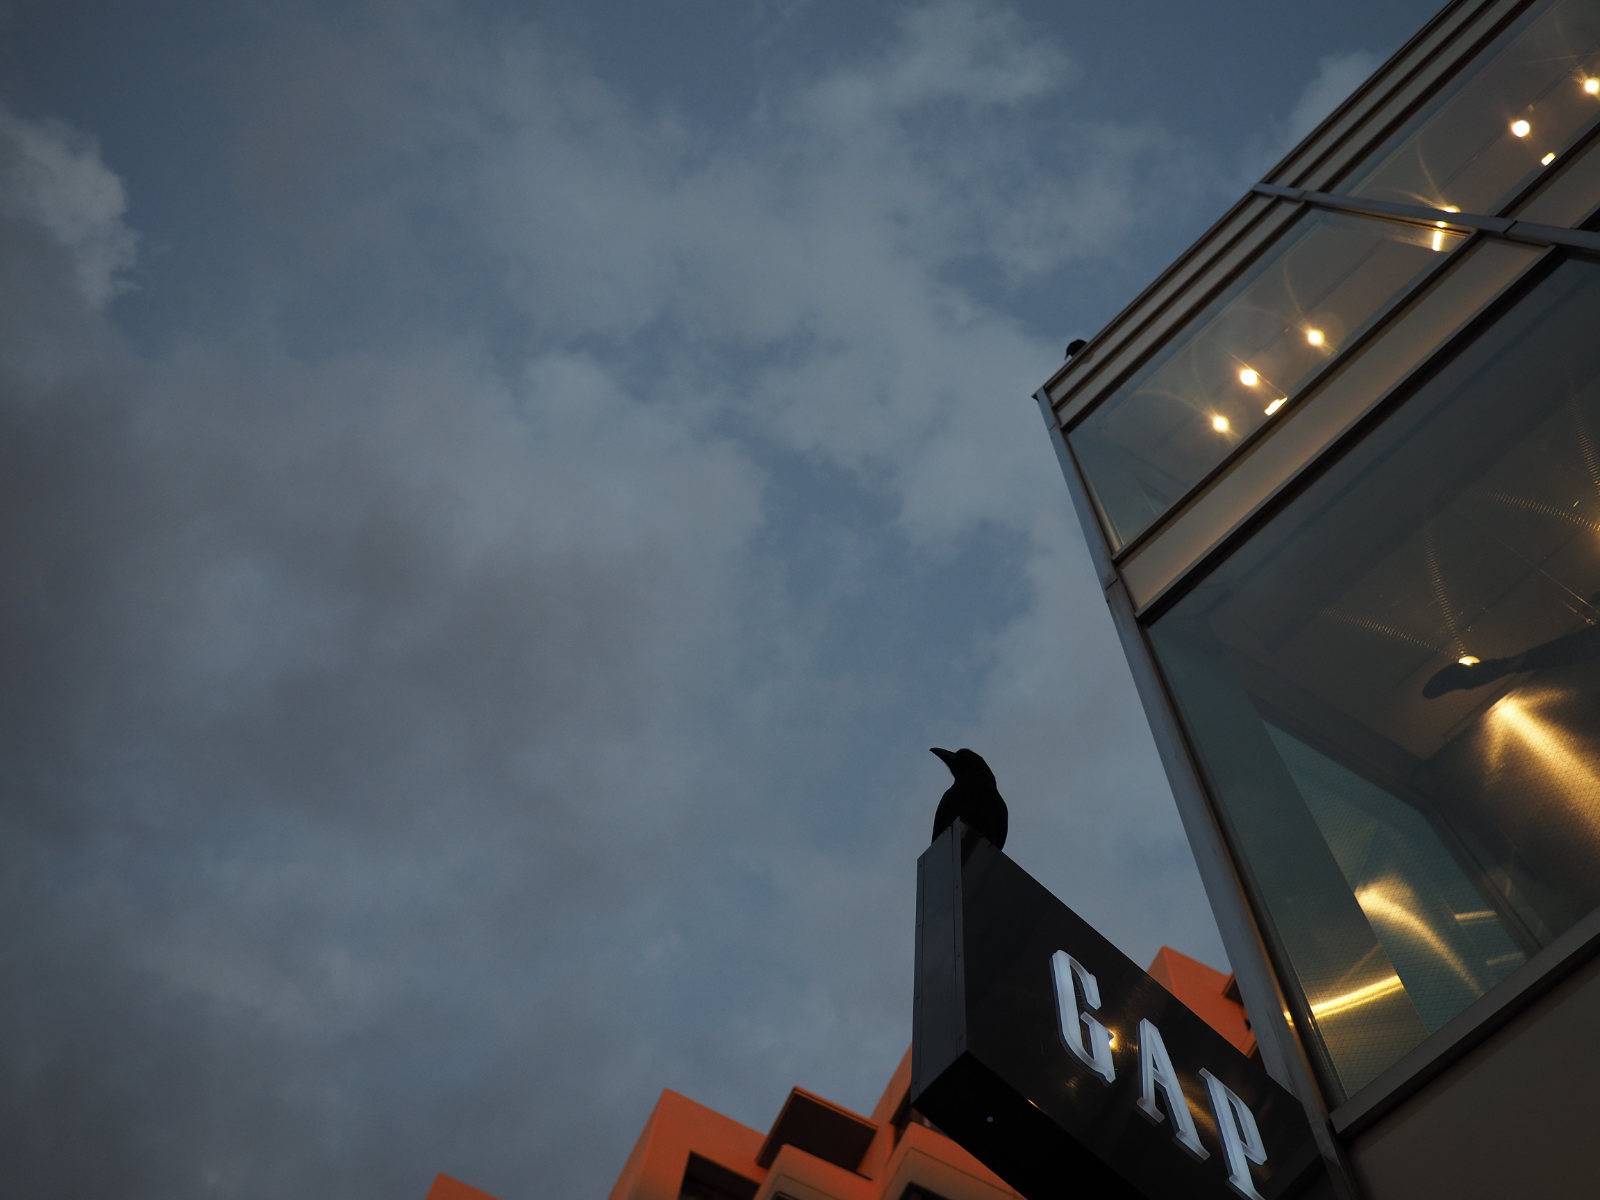 A crow perched on a GAP store sign